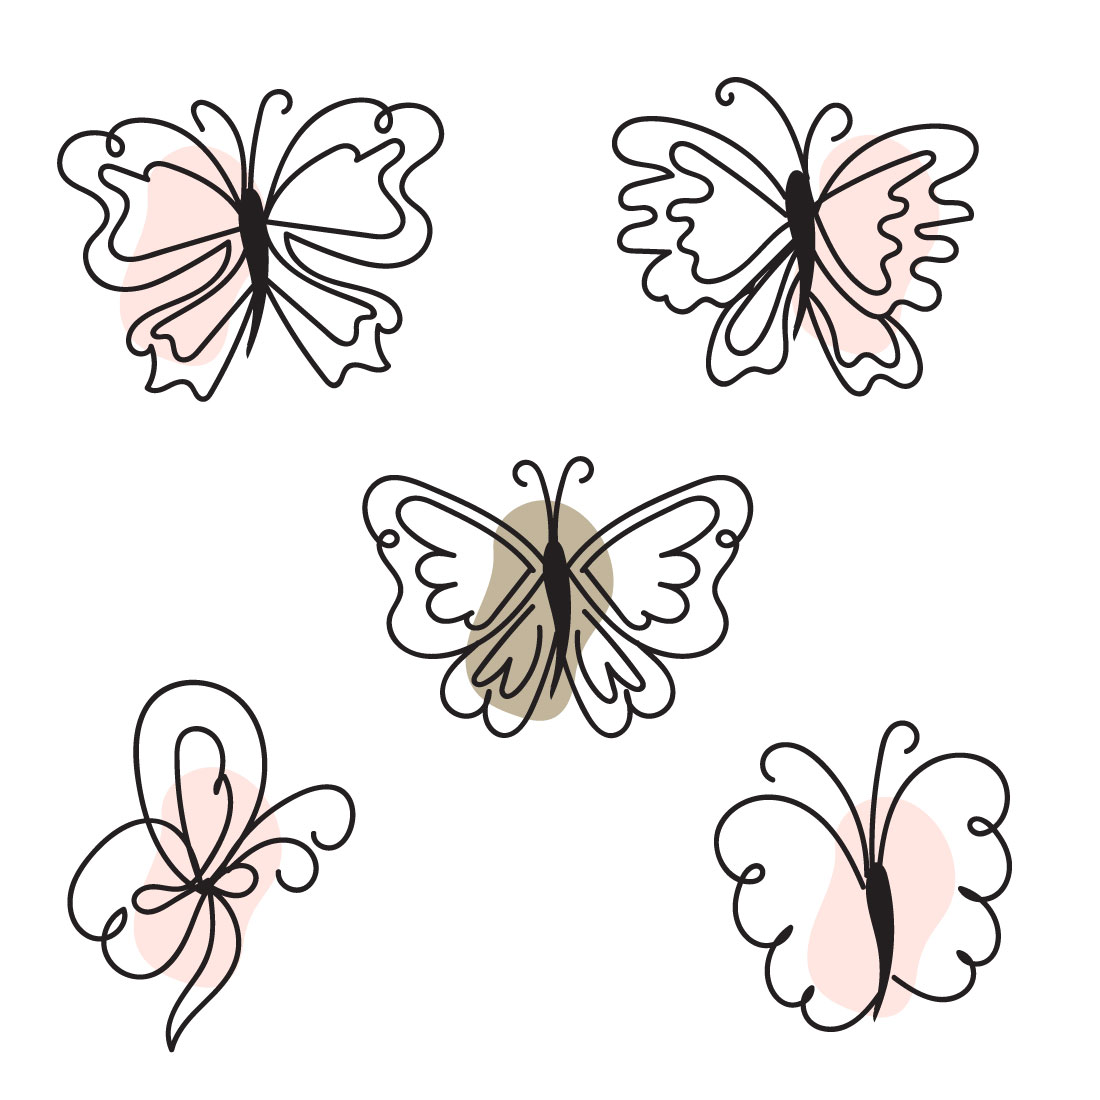 Art Butterfly Cliparts main cover.